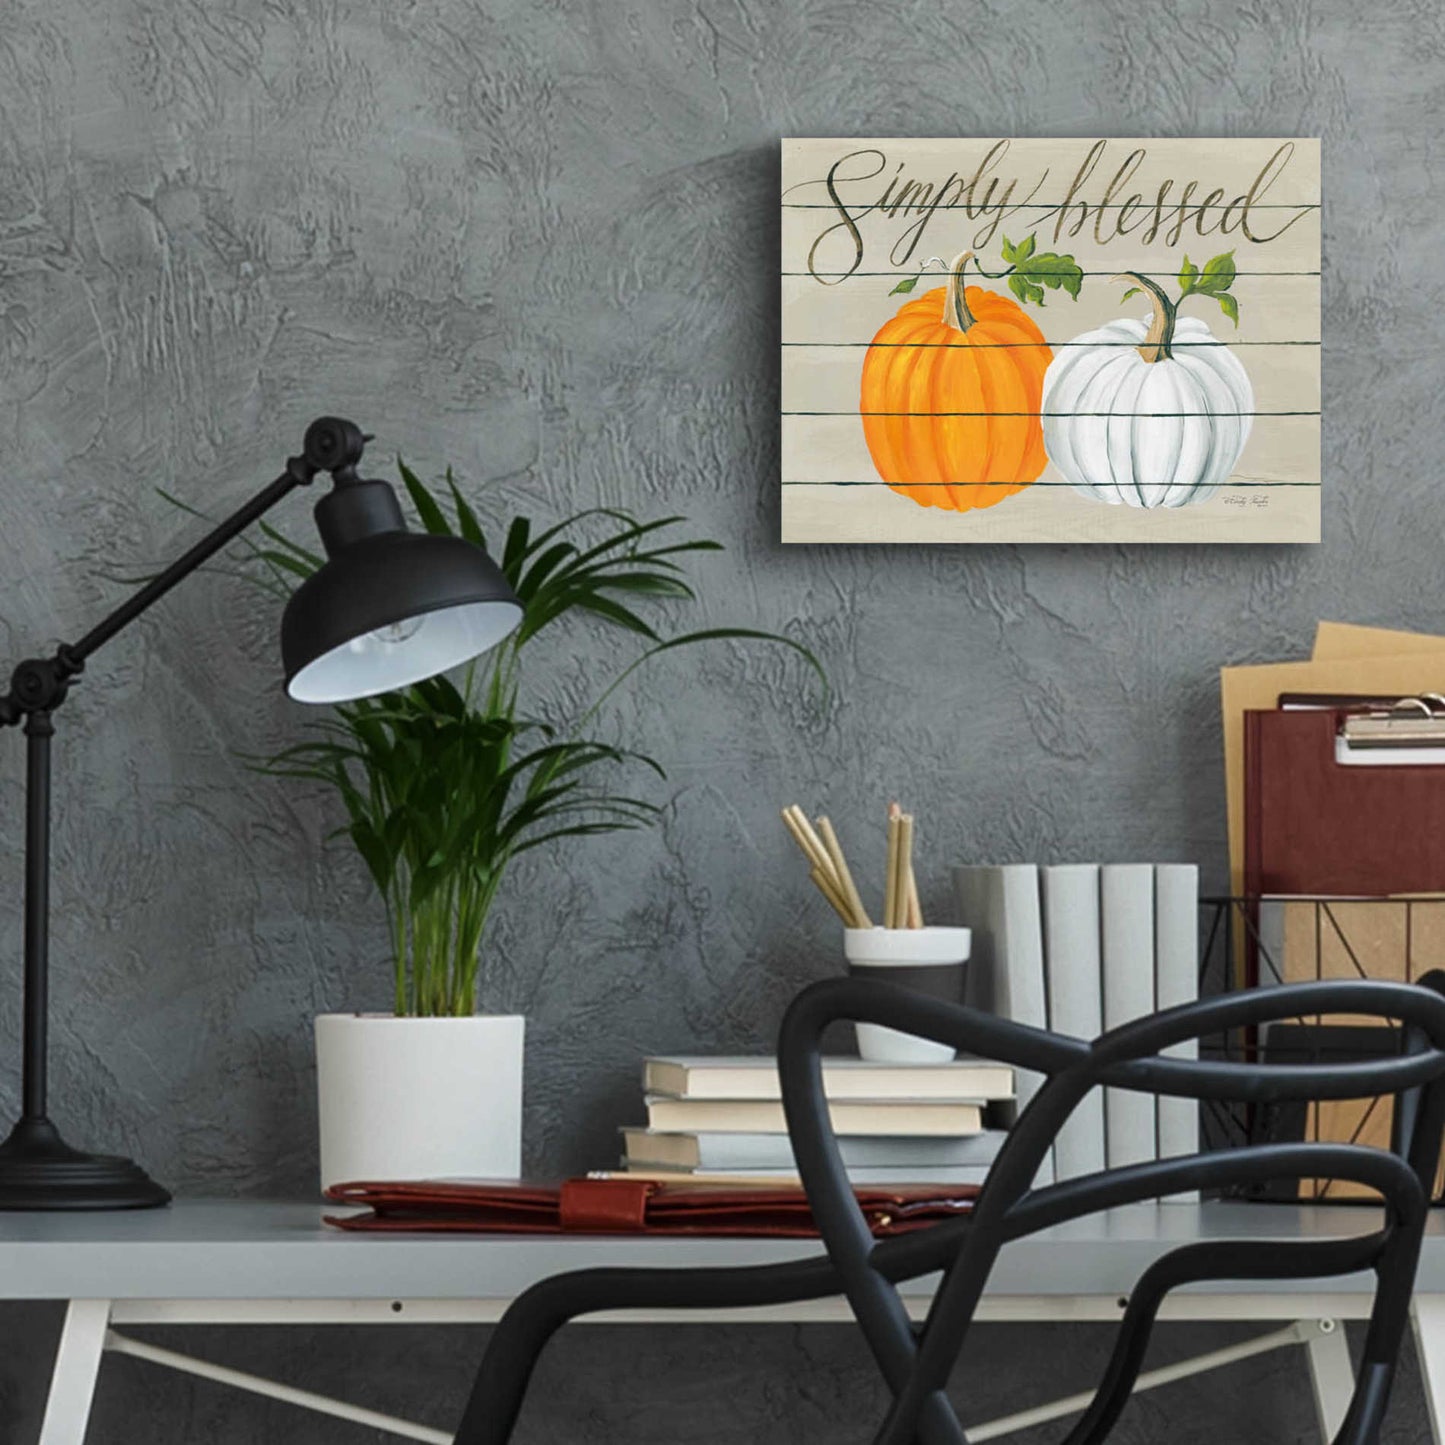 Epic Art 'Simply Blessed Pumpkins' by Cindy Jacobs, Acrylic Glass Wall Art,16x12